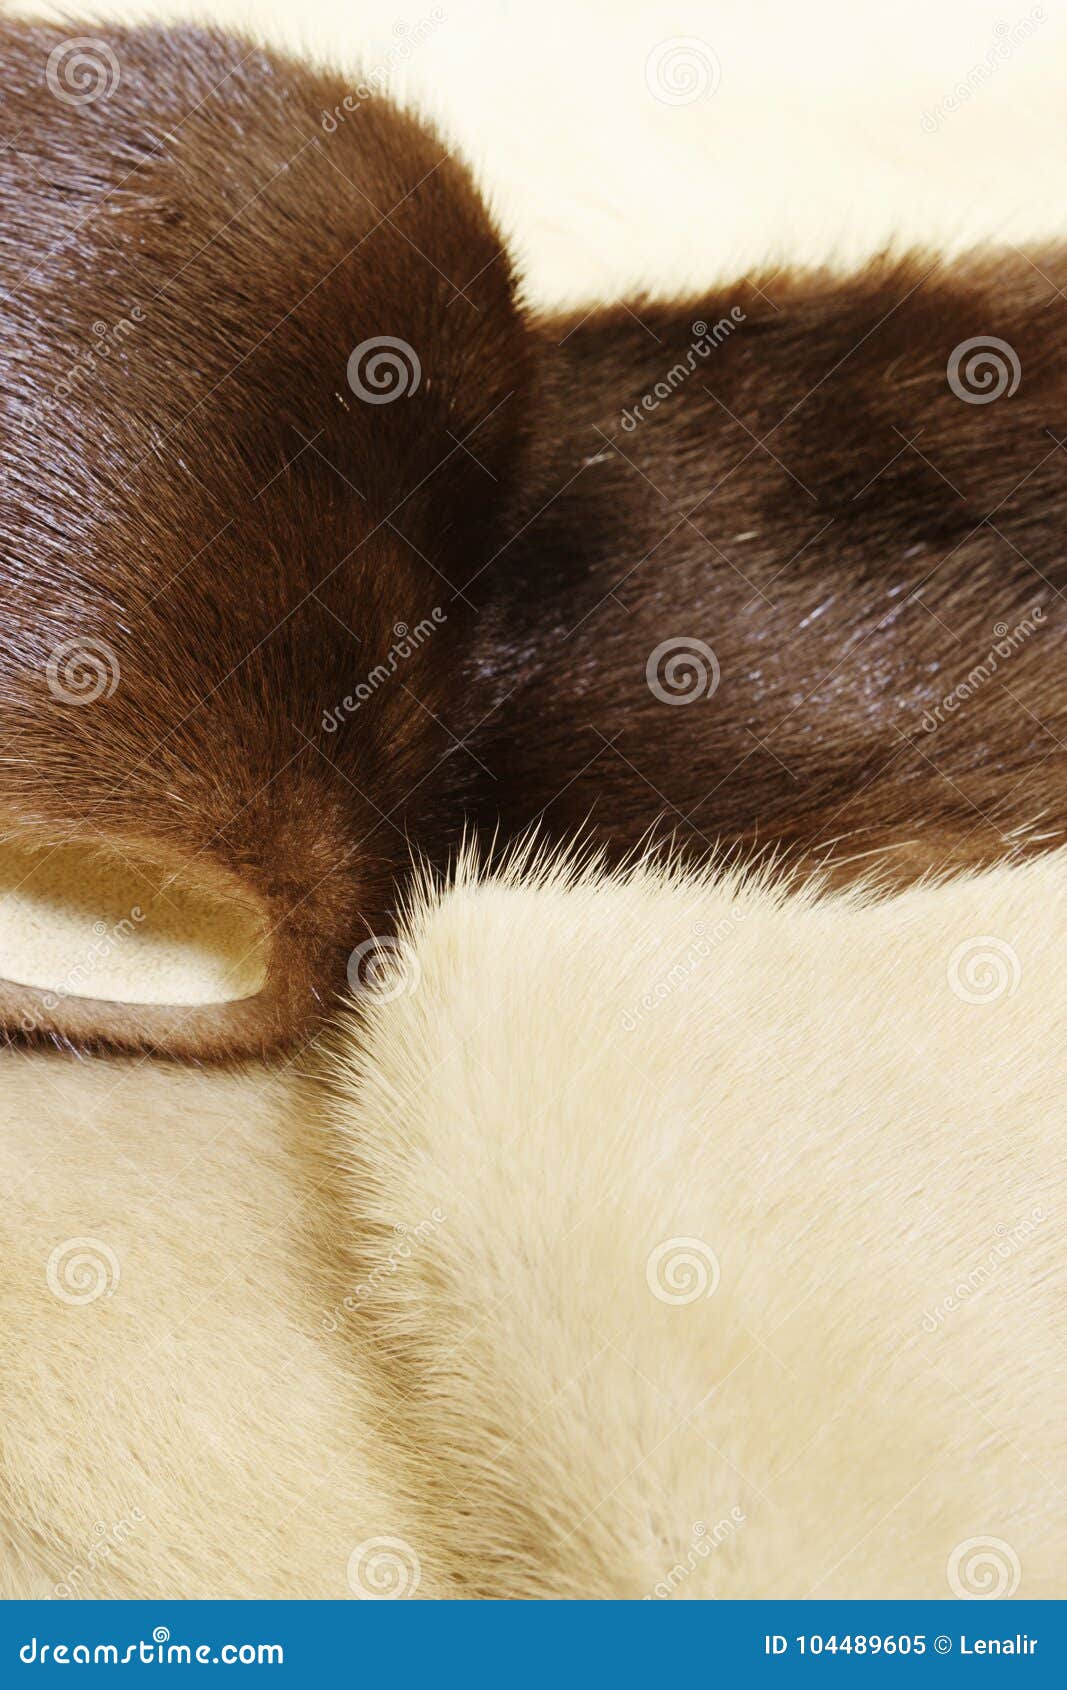 Fur of the mink stock image. Image of mink, manufacture - 104489605